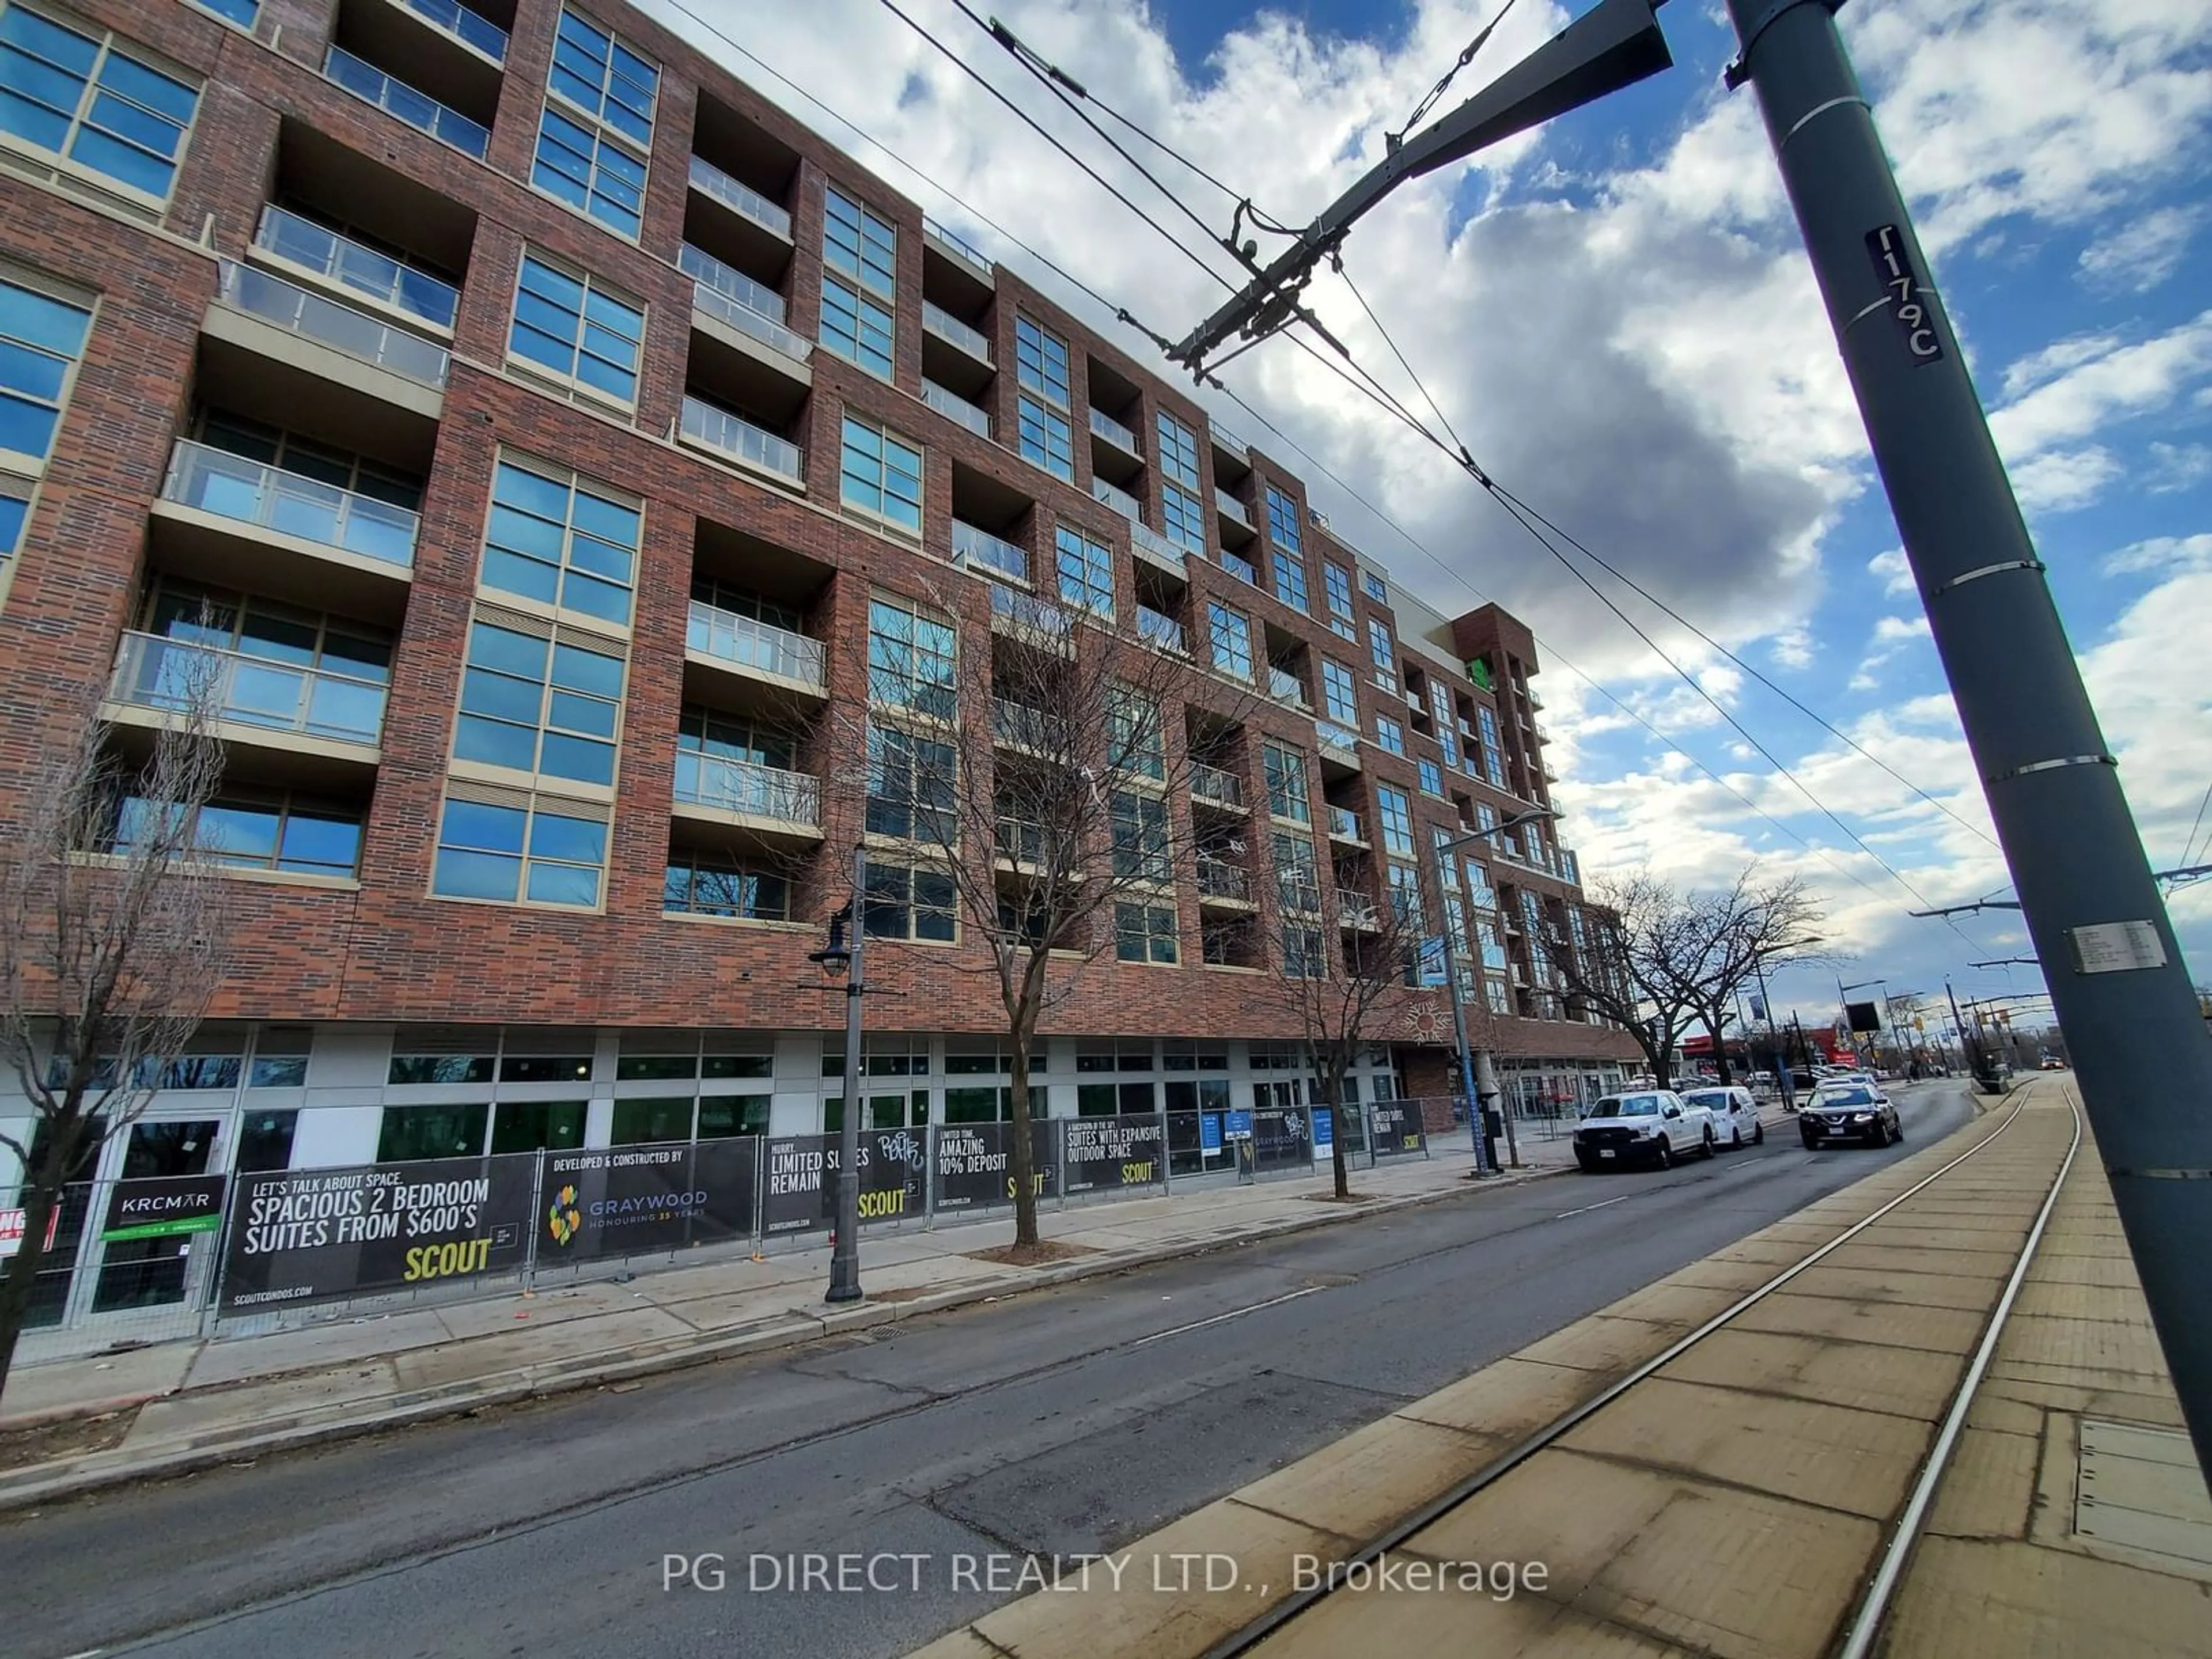 A pic from exterior of the house or condo for 1787 St Clair Ave #324, Toronto Ontario M6N 1J6